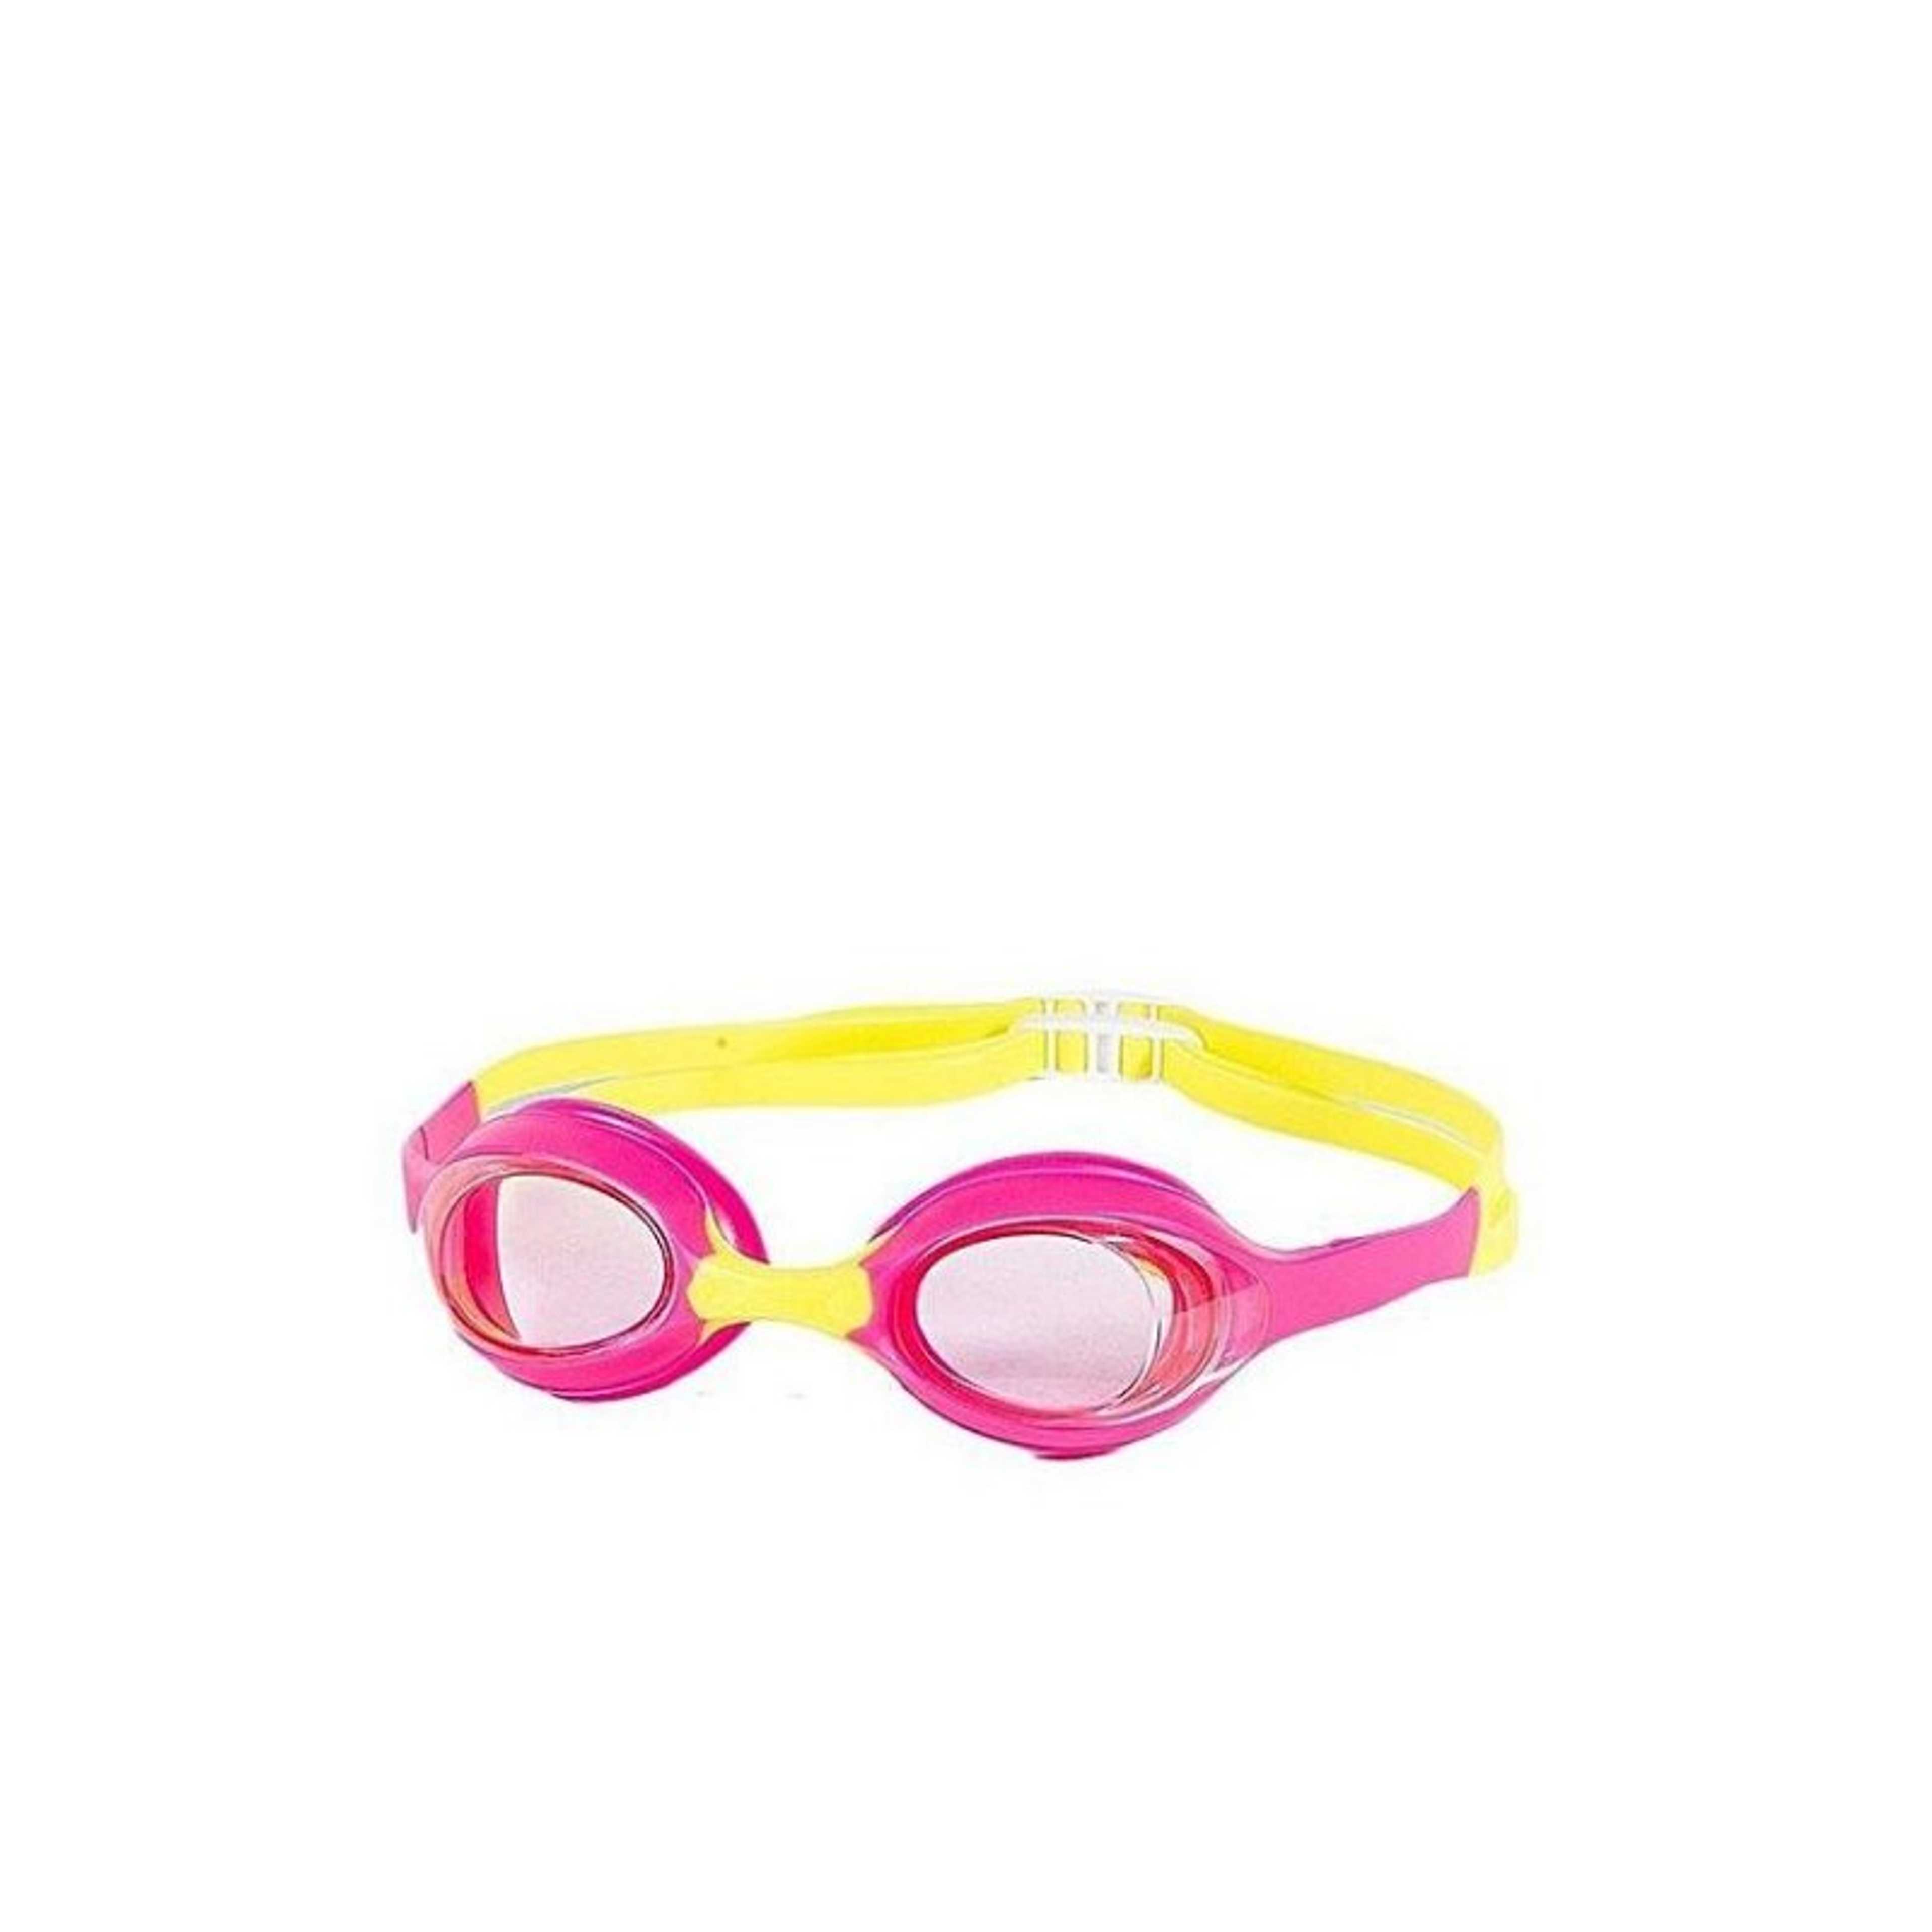 Grilong Swimming Goggle For Kids - Pink